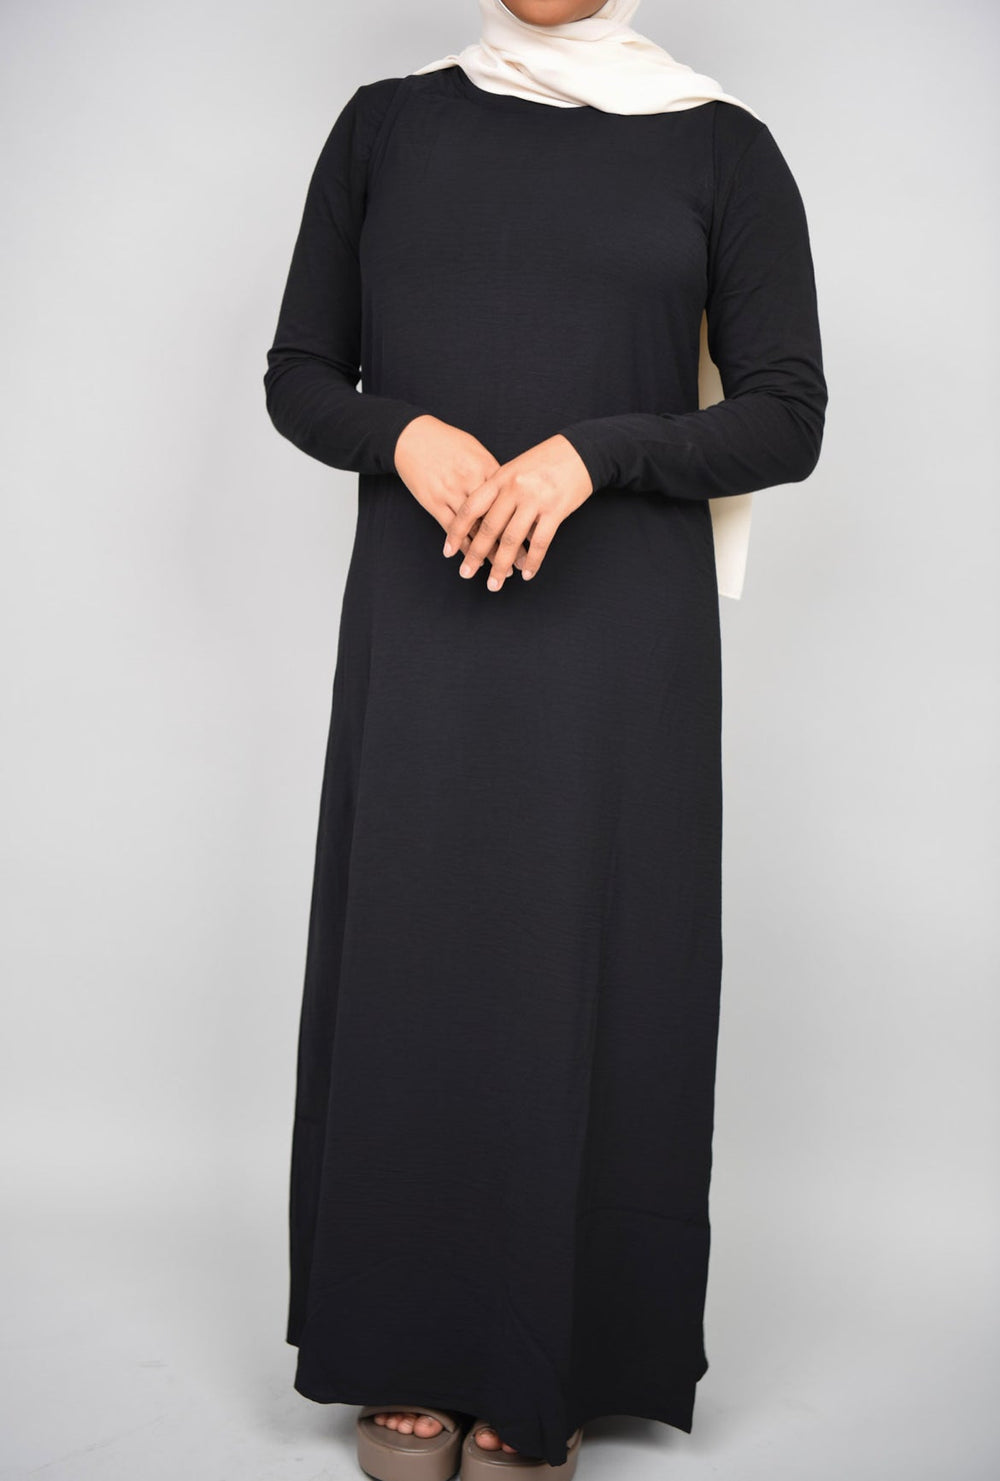 Get trendy with Mariya 2-piece Jilbab - Black -  available at Voilee NY. Grab yours for $34.99 today!